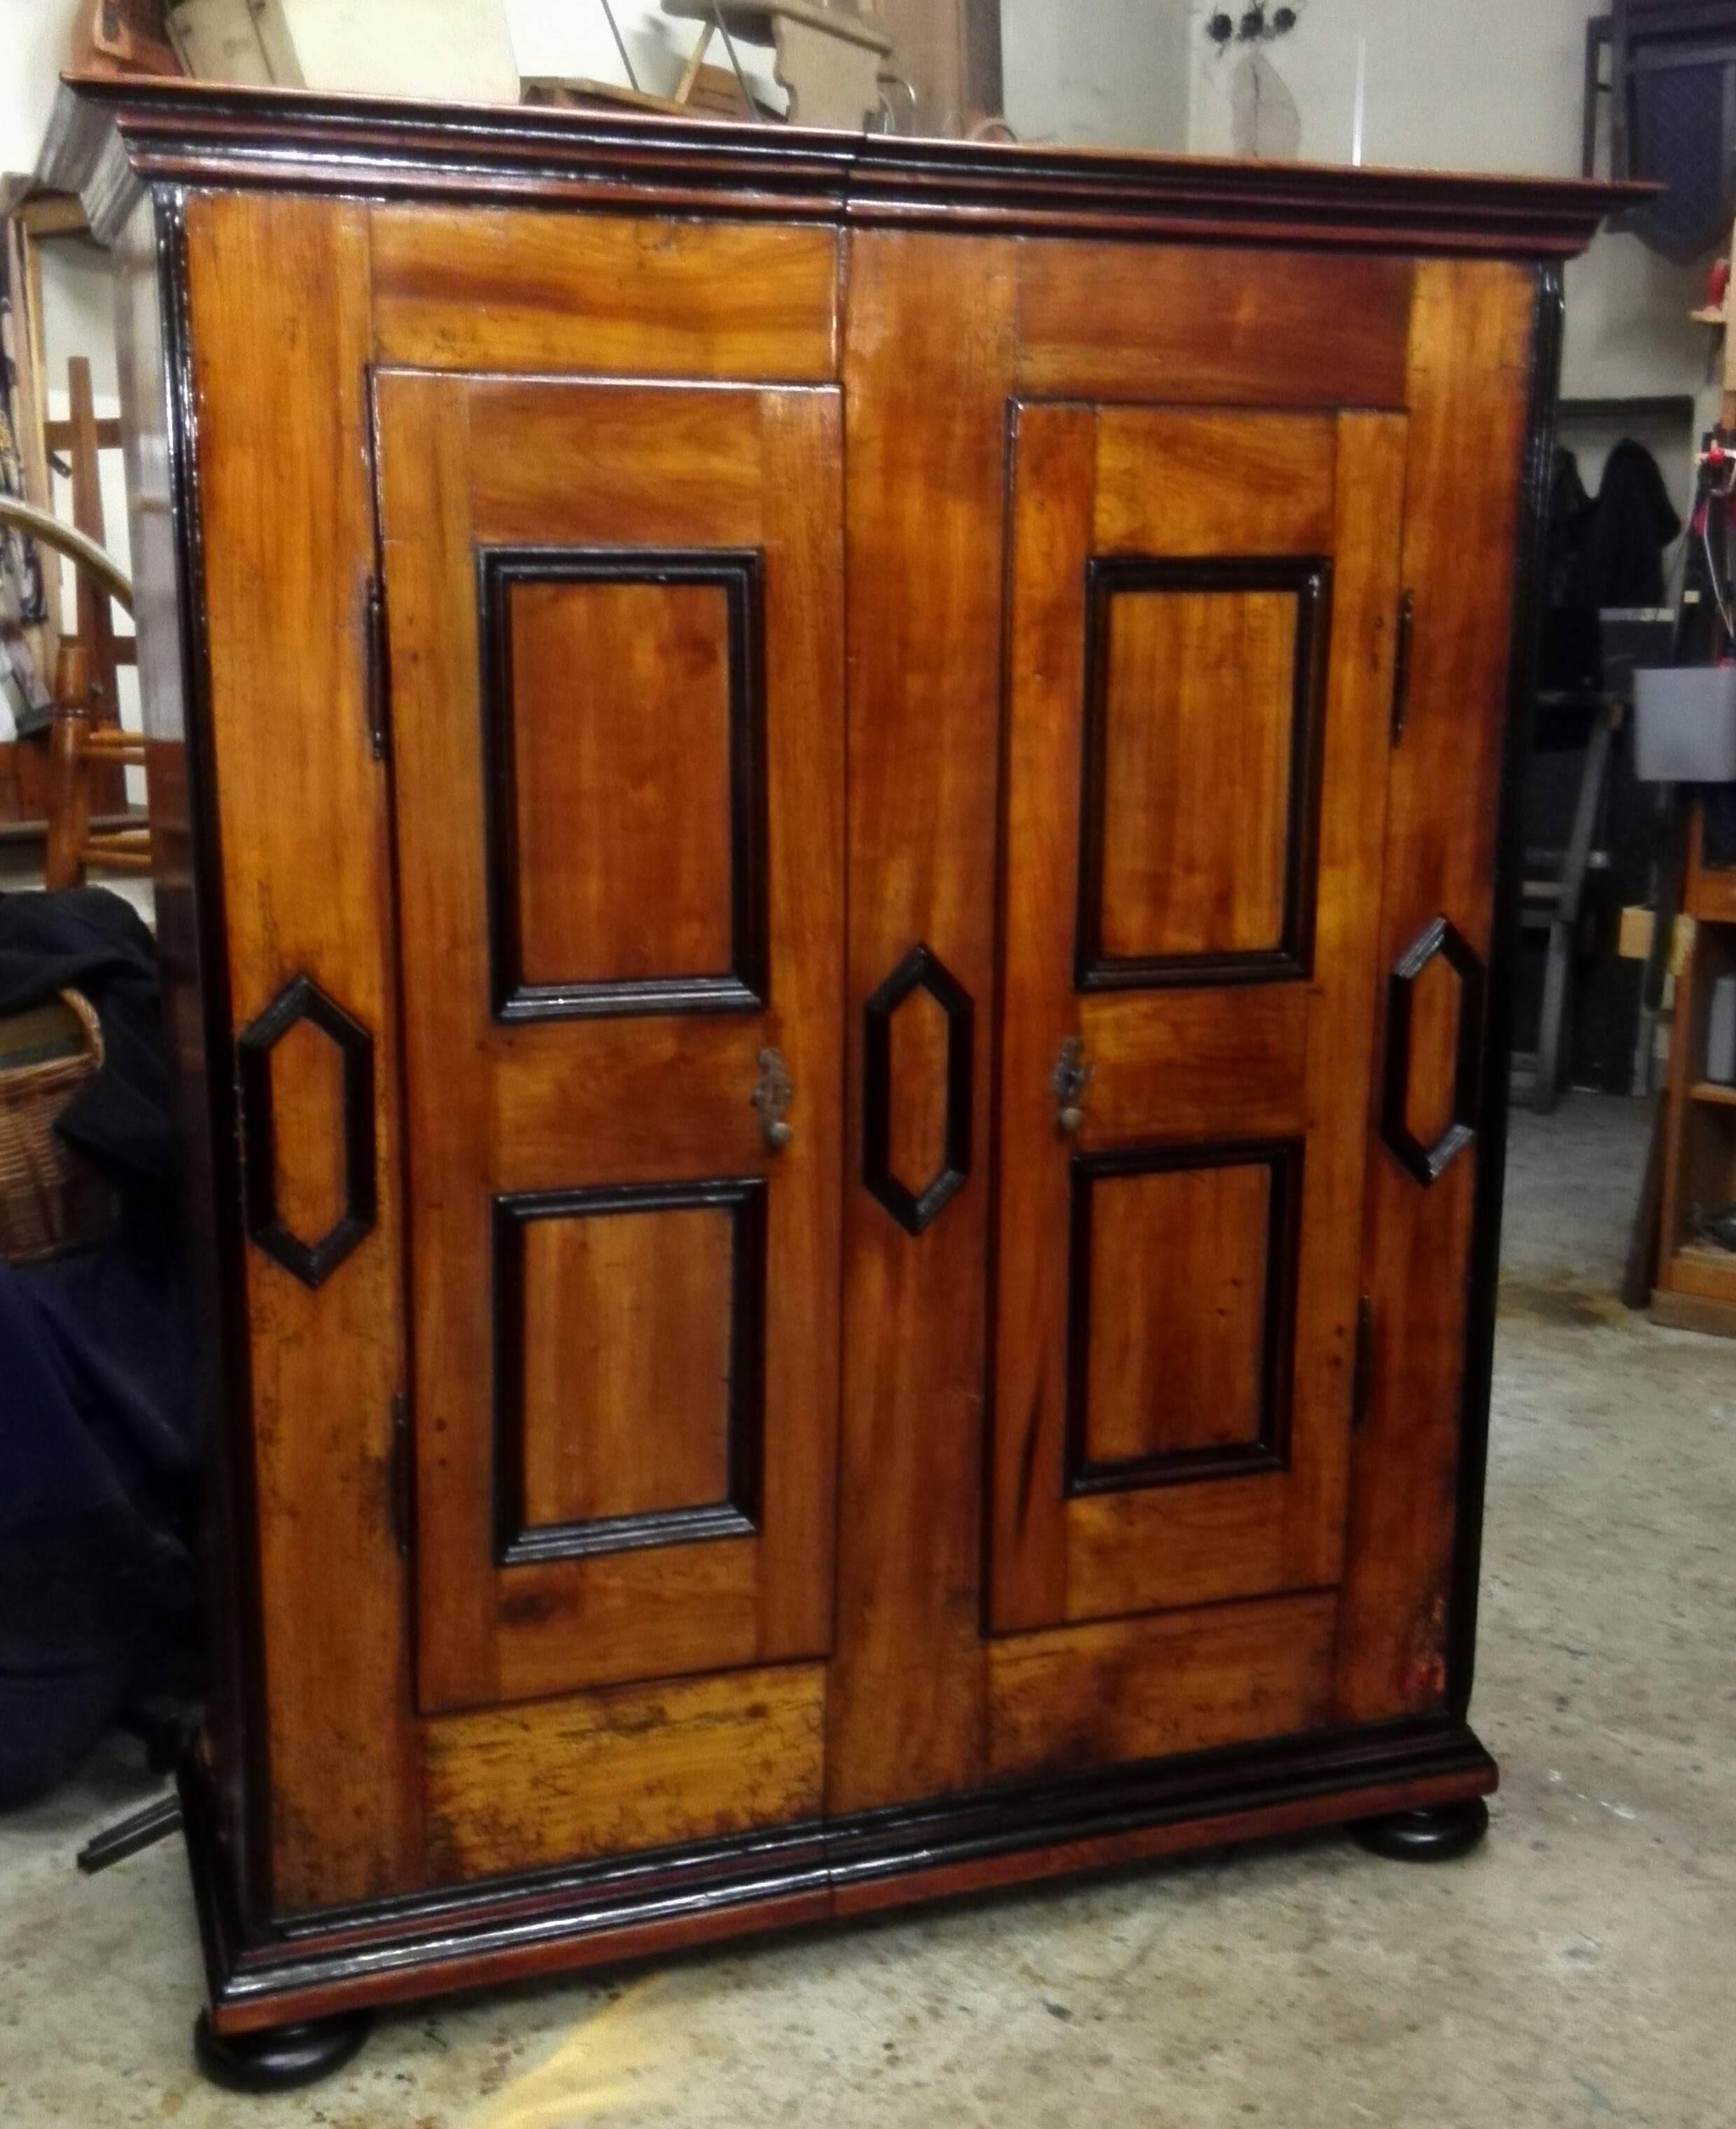 This two-door Swiss plank cabinet in solid sherry wood. It is divided vertically in two! The doors hing on Handdorfer Joints and divided into two panels. The lock is the original and works perfect. The also hand-forged sliding bold and the fittings